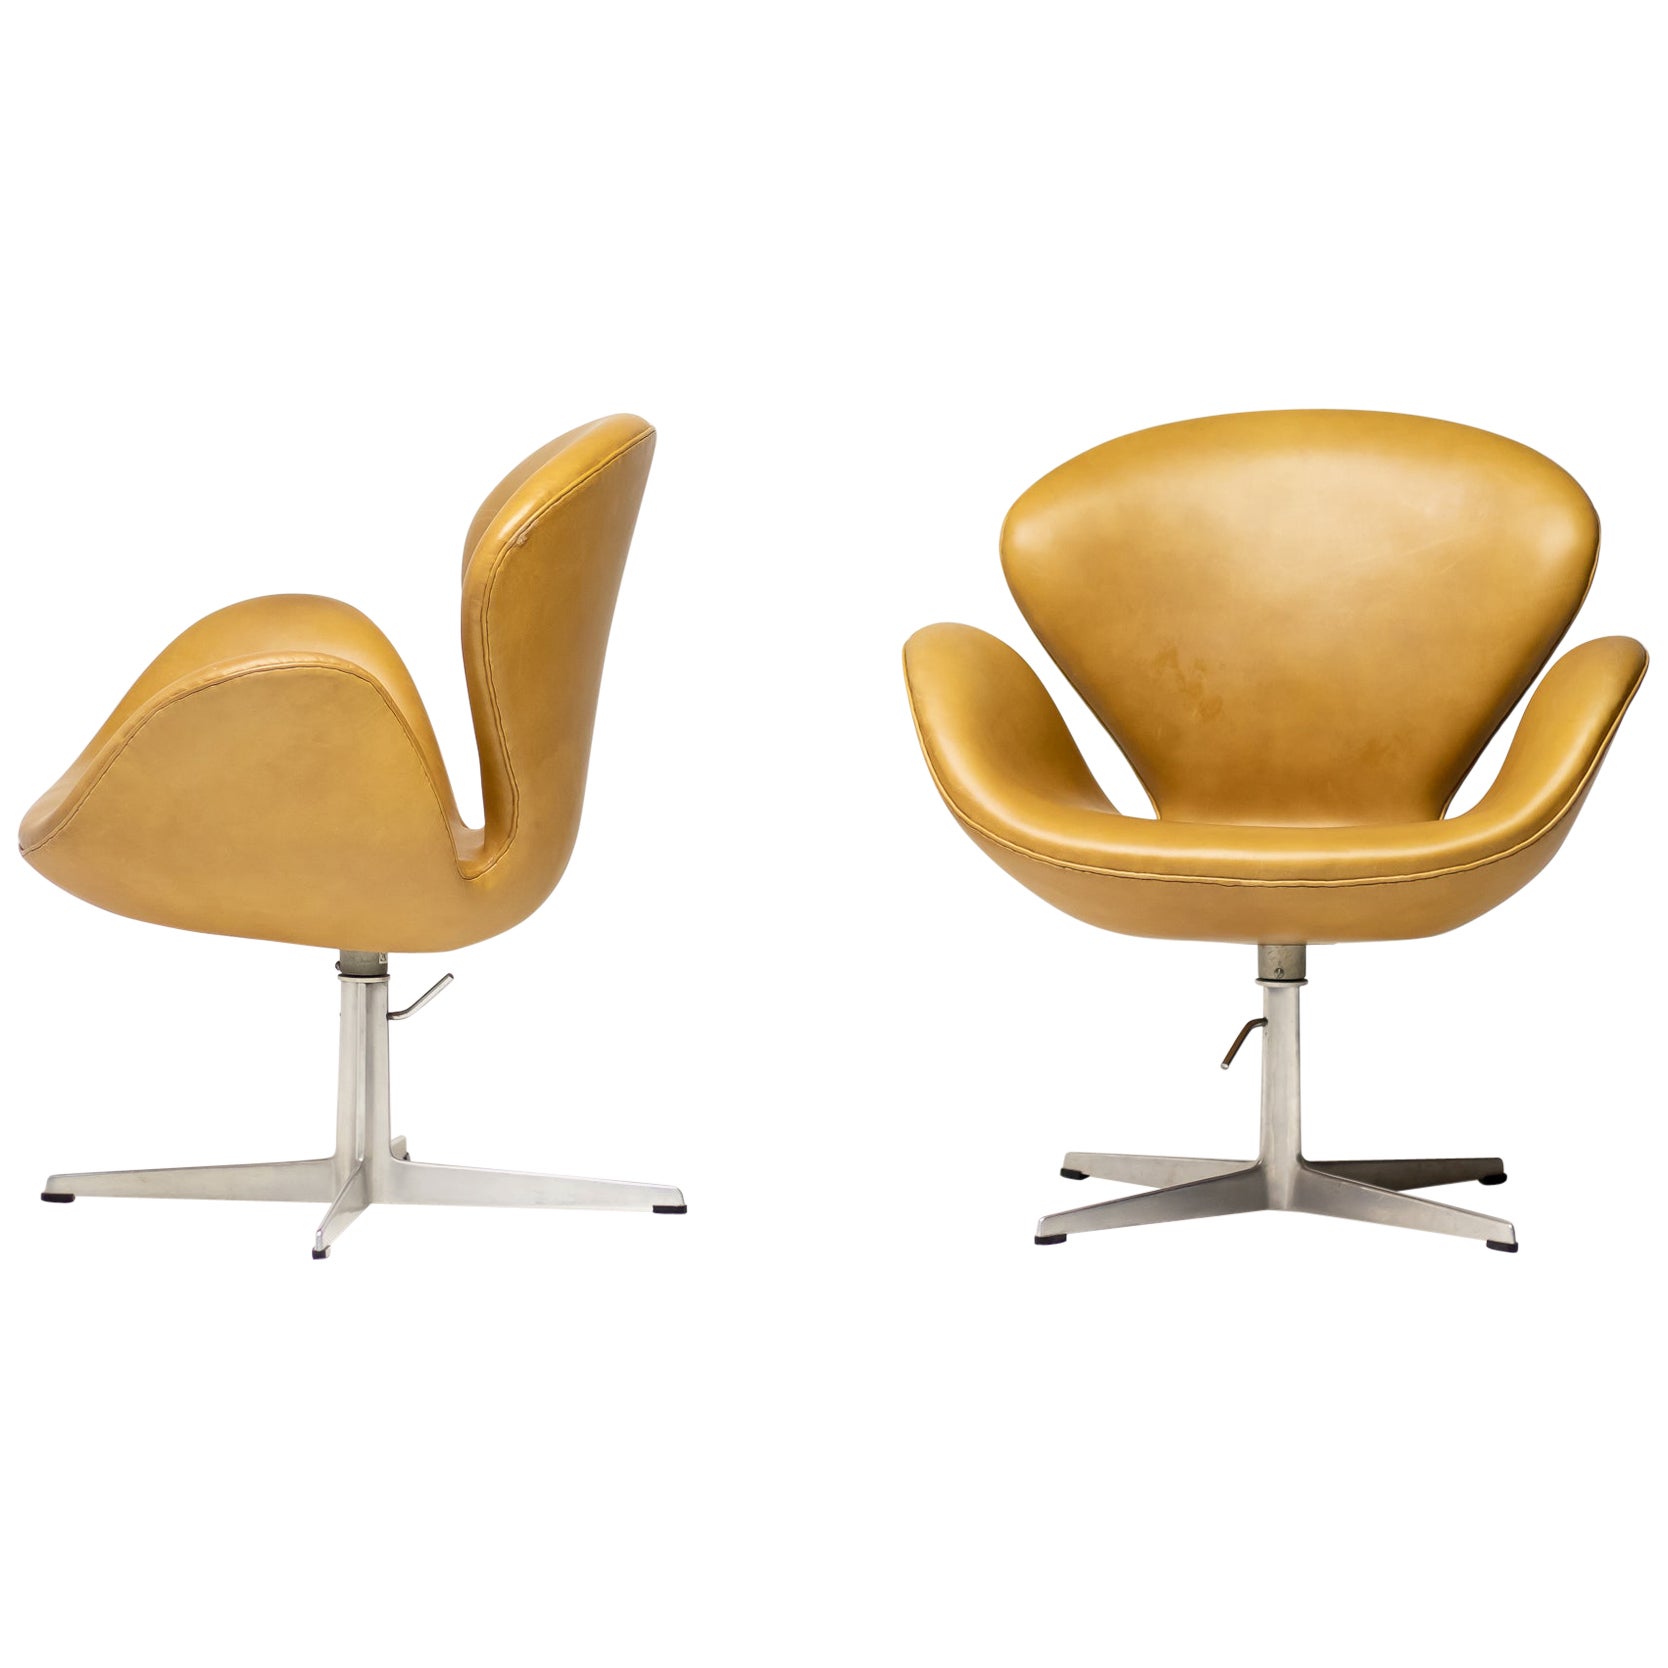 1971 Leather Swan Chairs by Arne Jacobsen